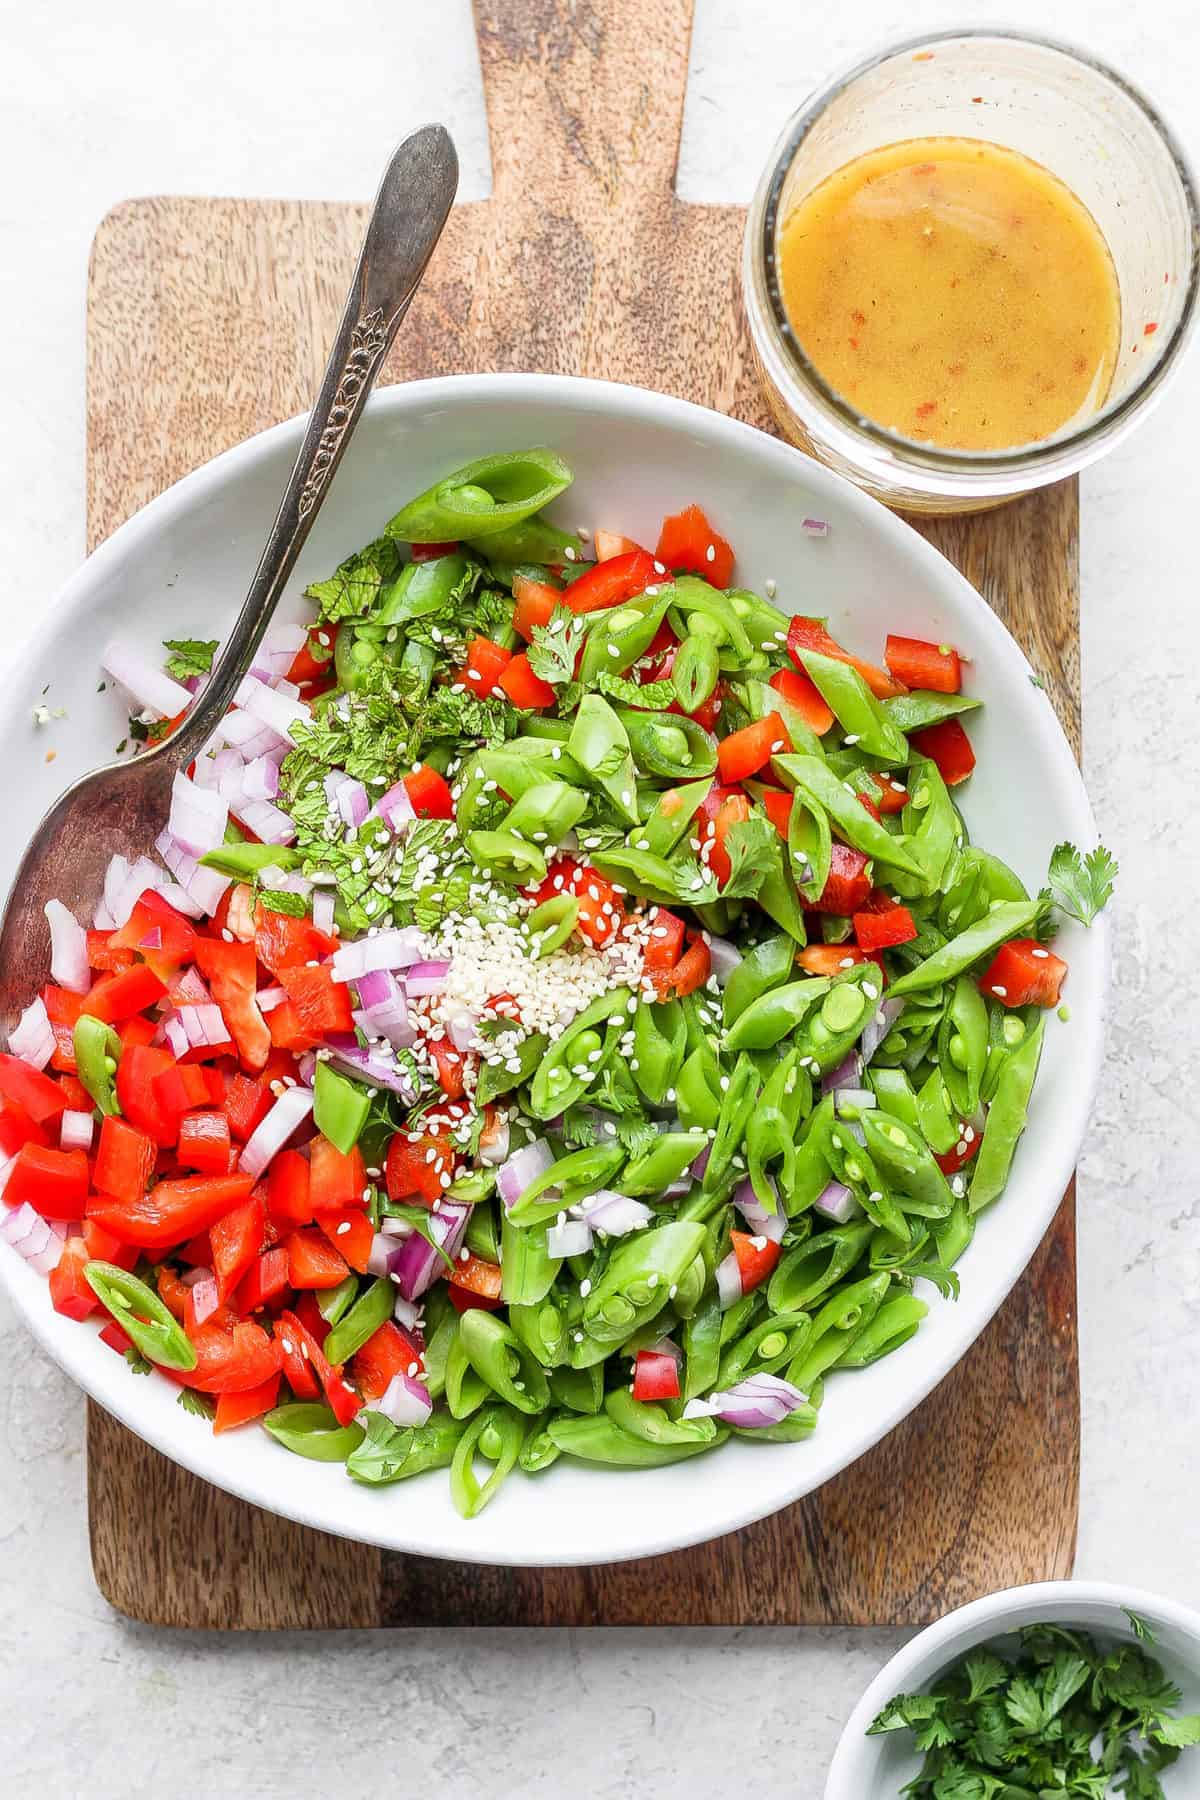 https://fitfoodiefinds.com/wp-content/uploads/2021/07/pea-salad-5-scaled.jpg